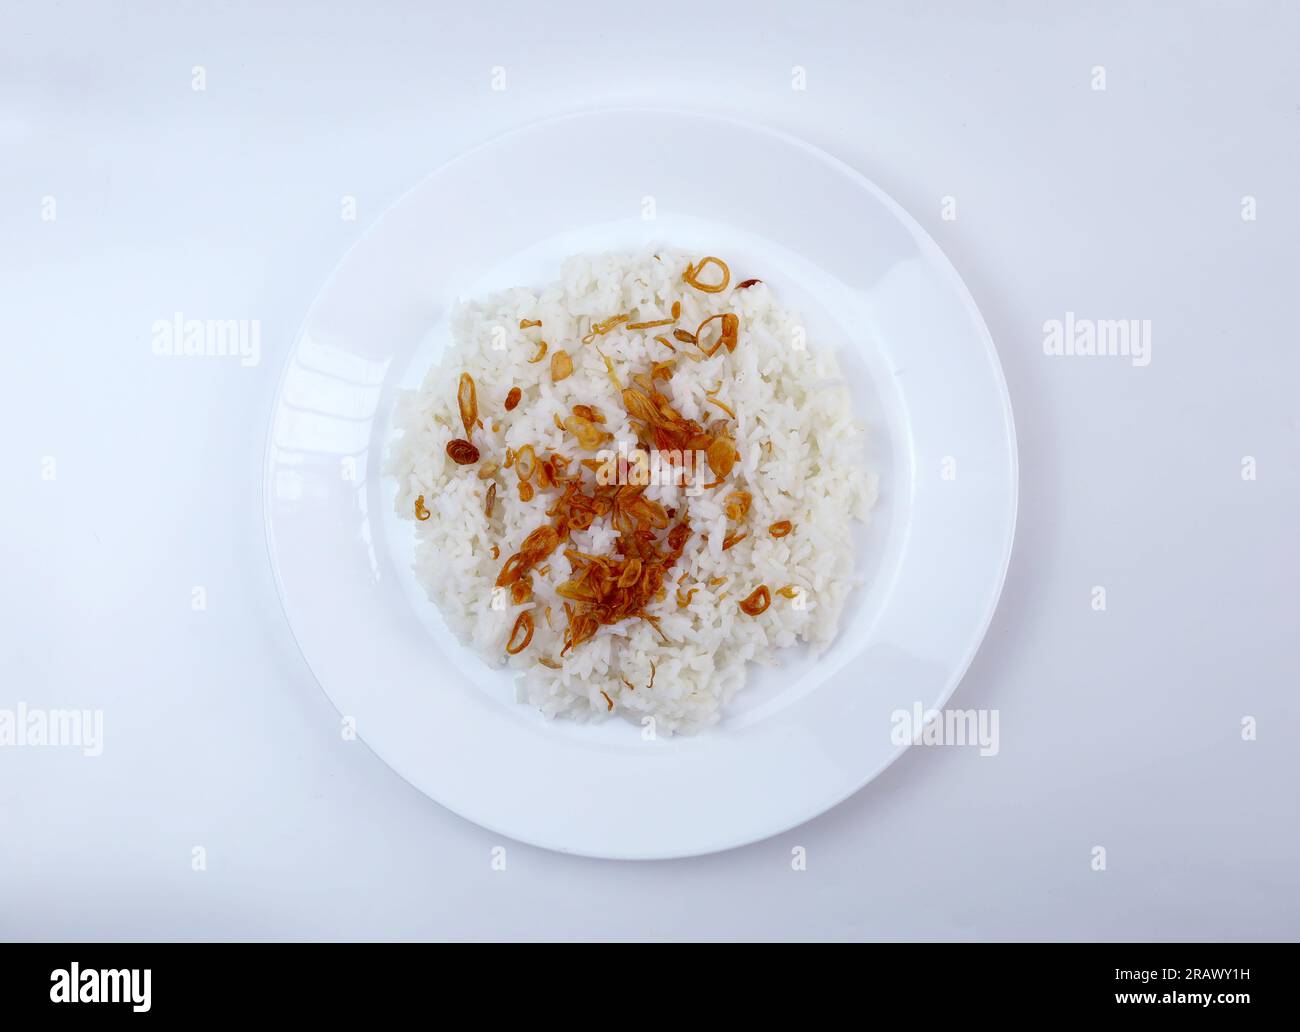 Top view a plate of warm white rice topped with fried onions. Concept for Asian comfort food. Stock Photo